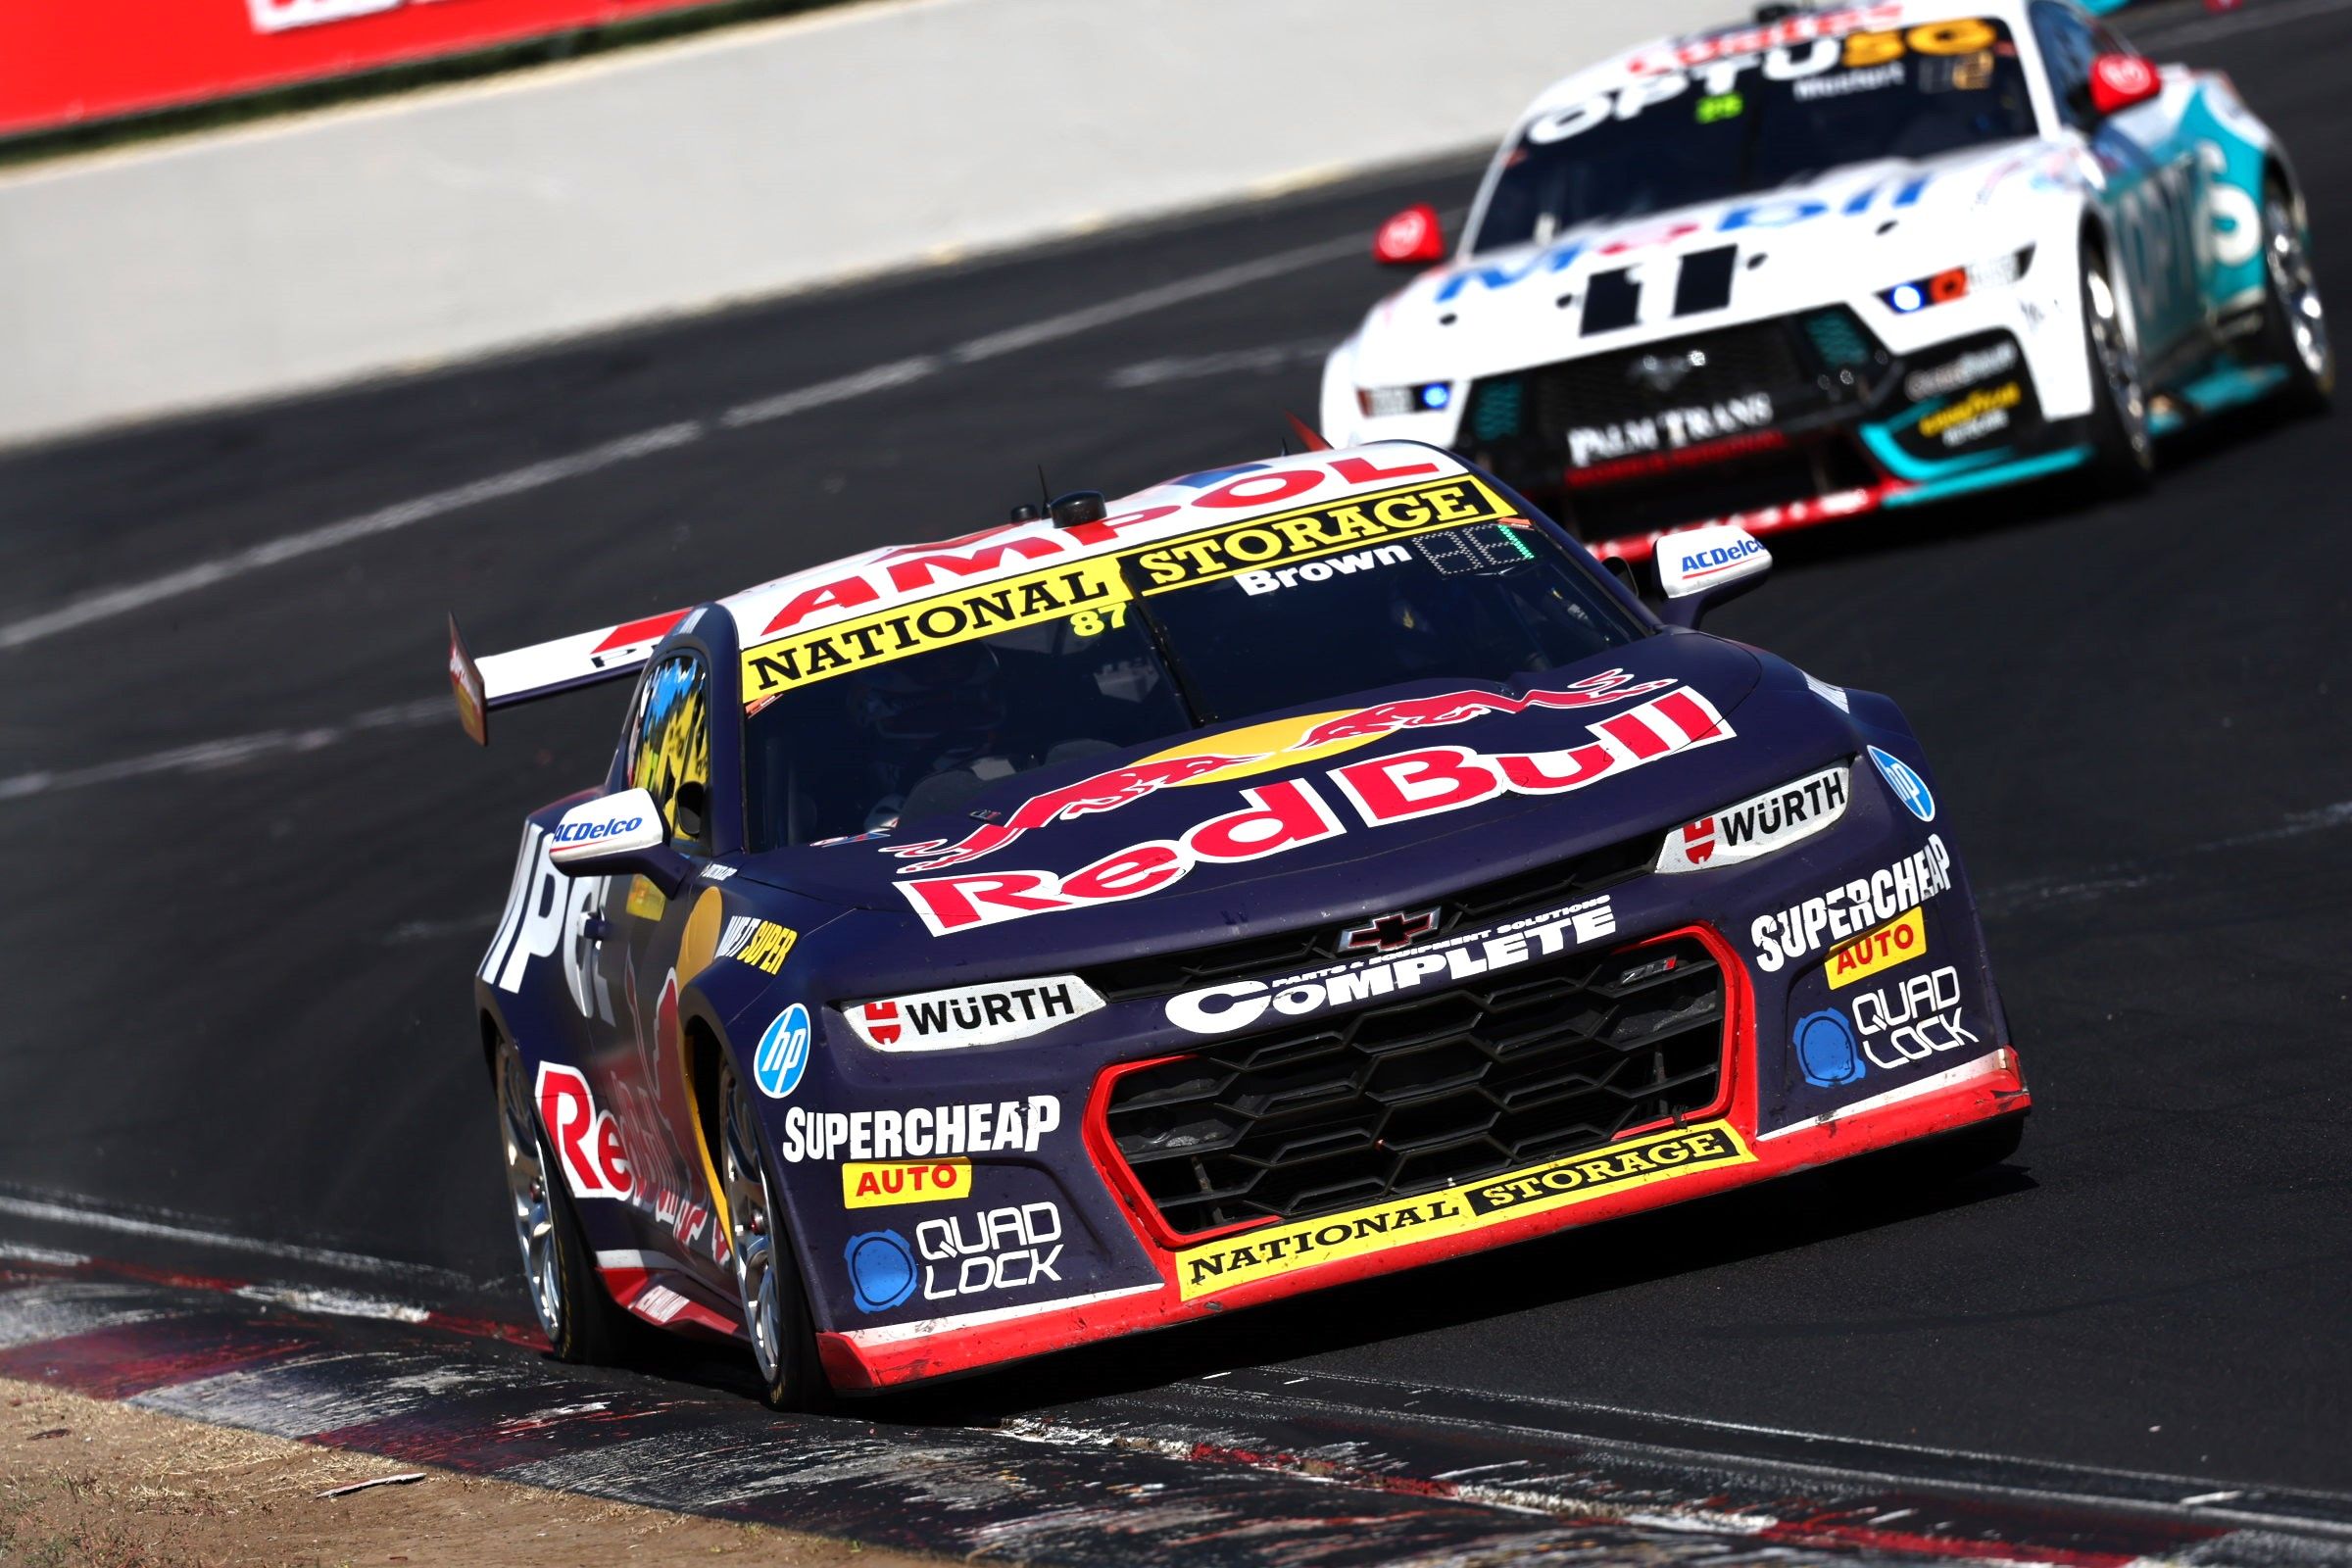 Will Brown claims first win for Red Bull and leads Championship after Bathurst 500